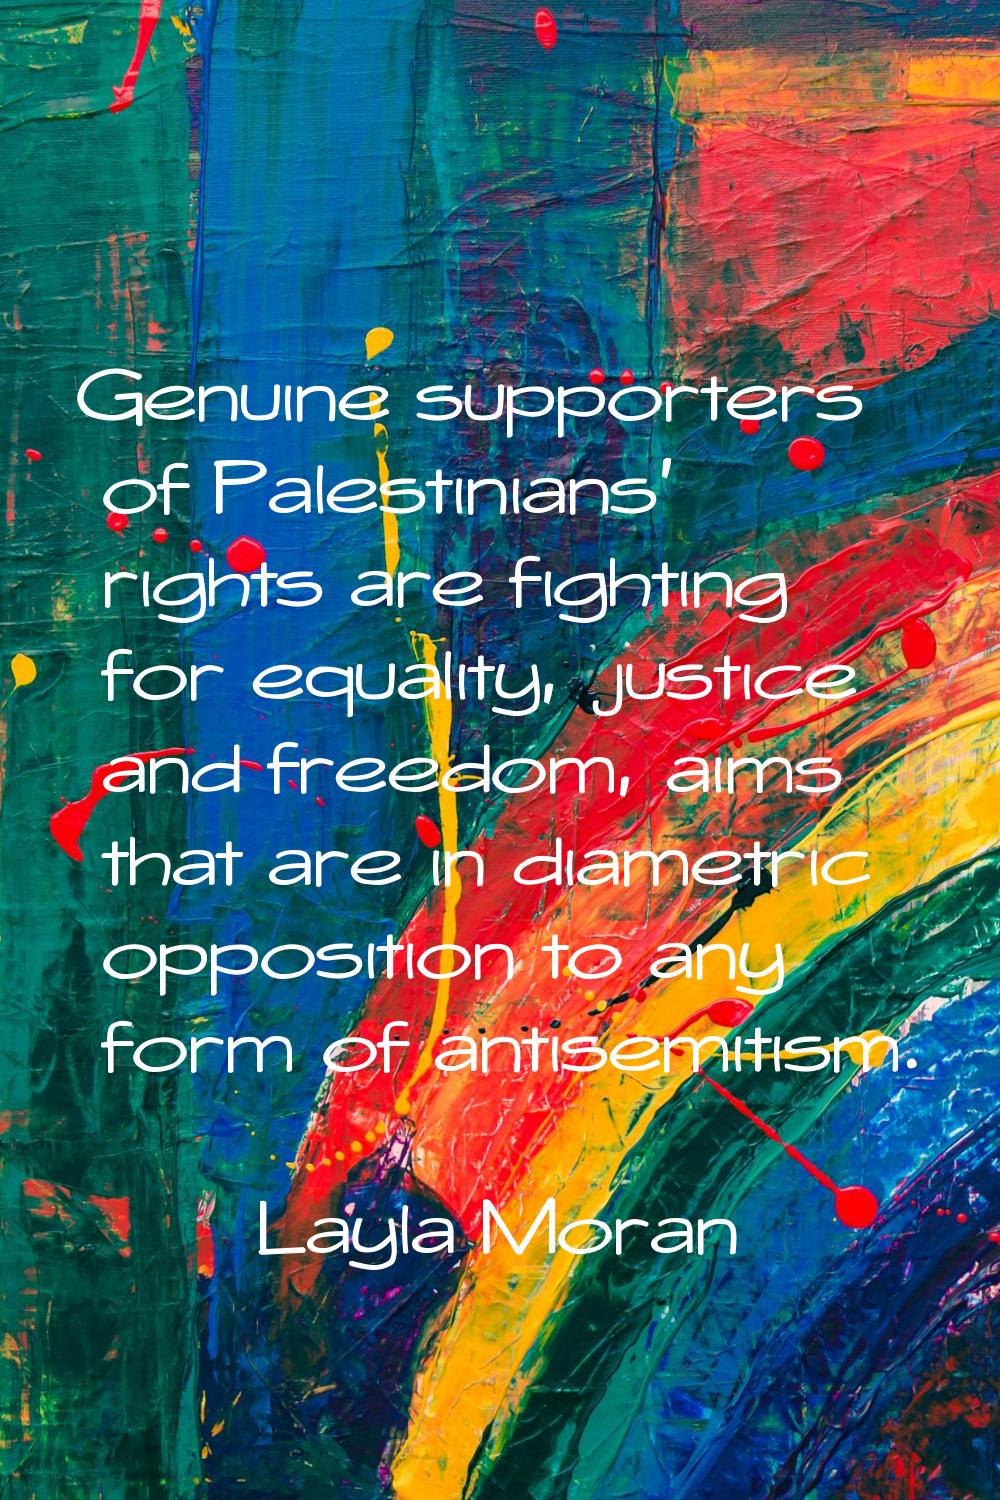 Genuine supporters of Palestinians’ rights are fighting for equality, justice and freedom, aims tha